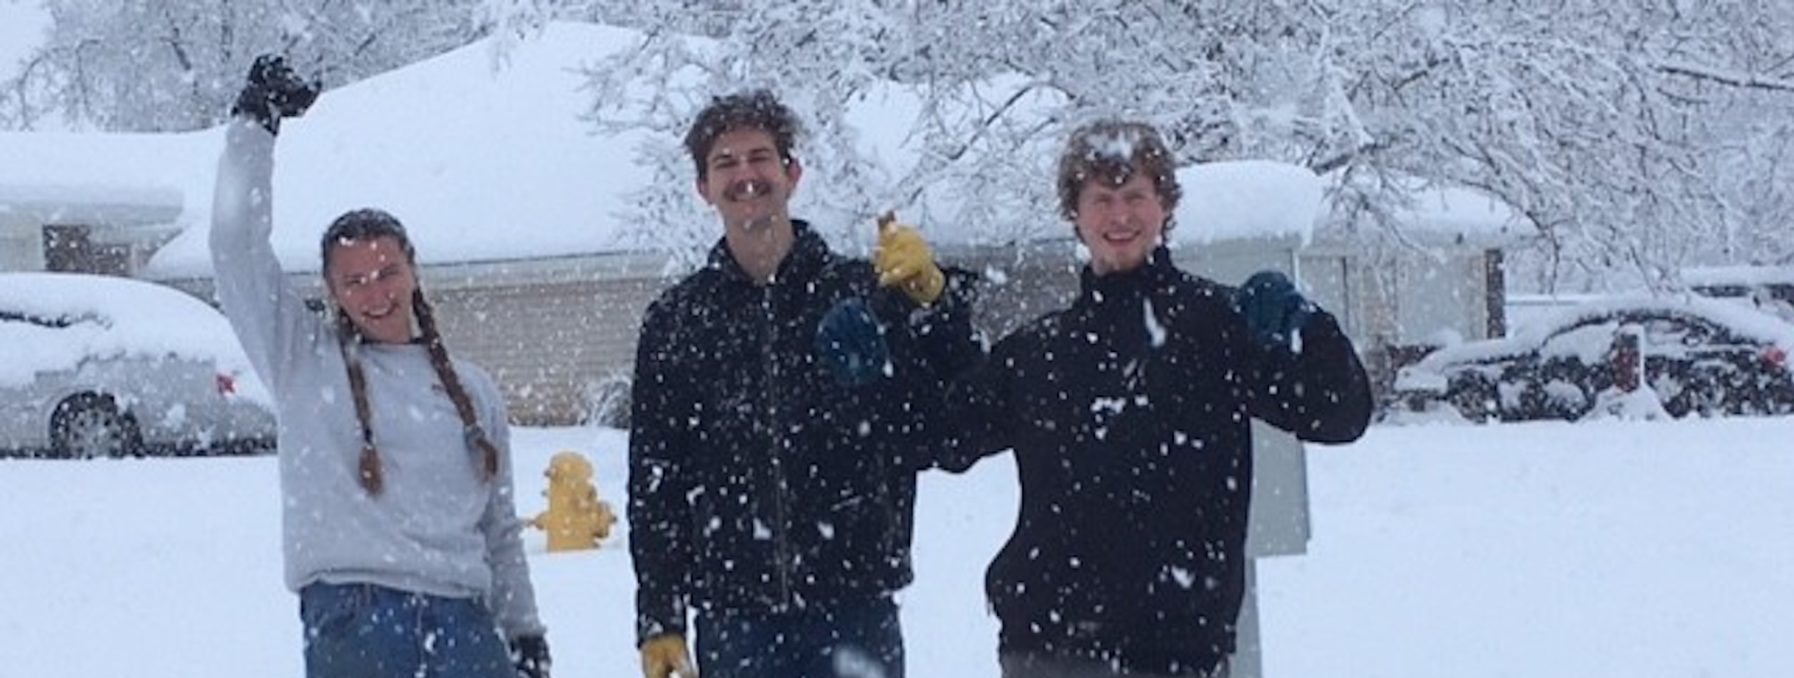 Katie Wray, Shiloh Taetz, Brayden King play in the snow in Paraadise.